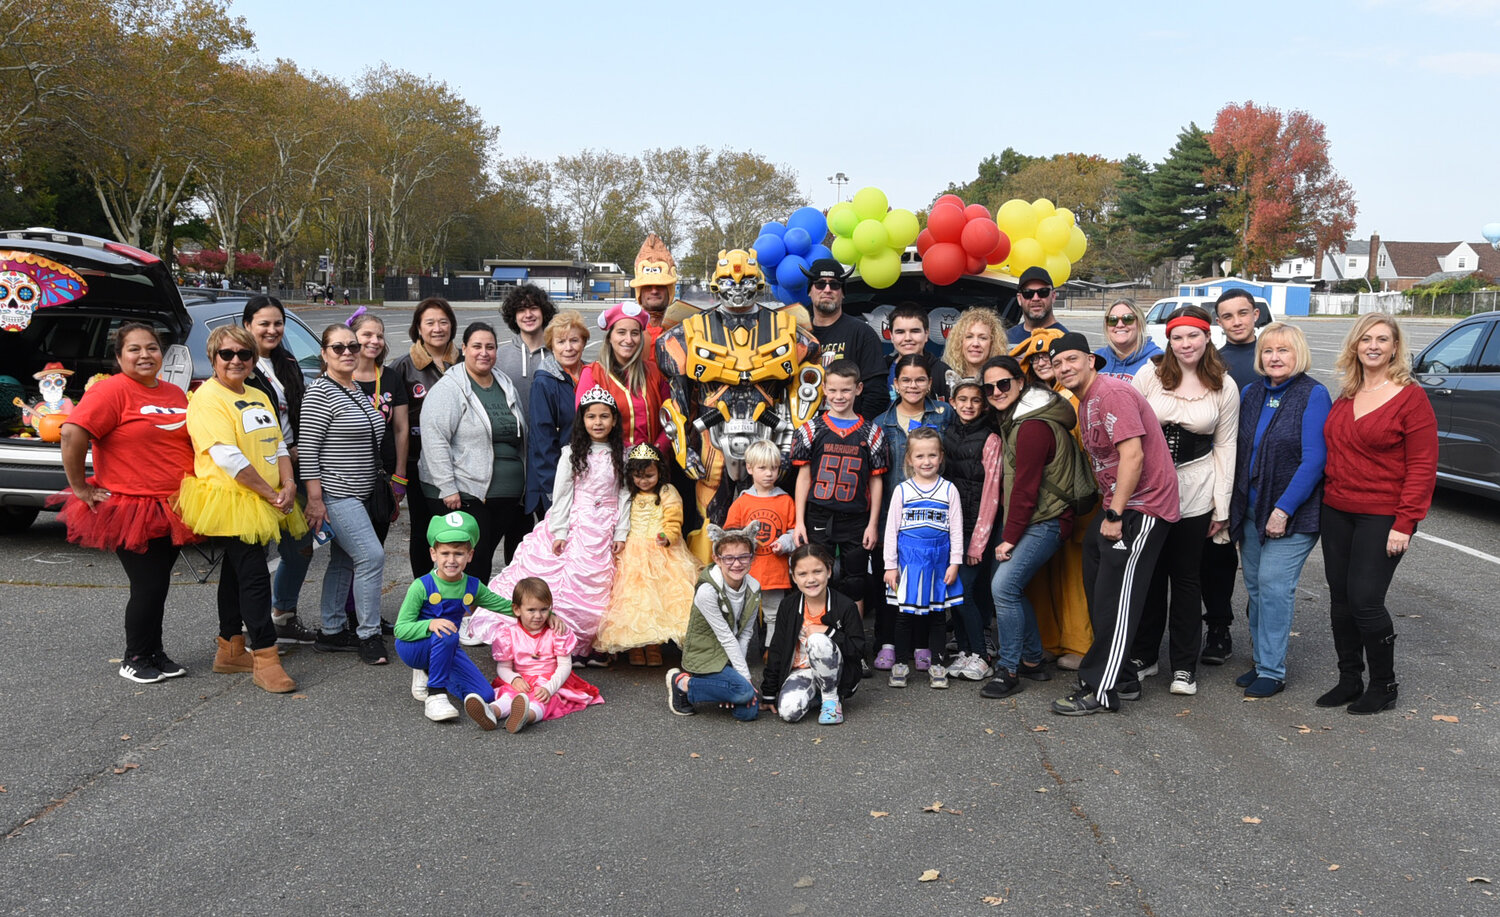 A good crowd showed up to sport their Halloween costumes once more at Rath Park for a Kiwanis Club trunk-or-treat.